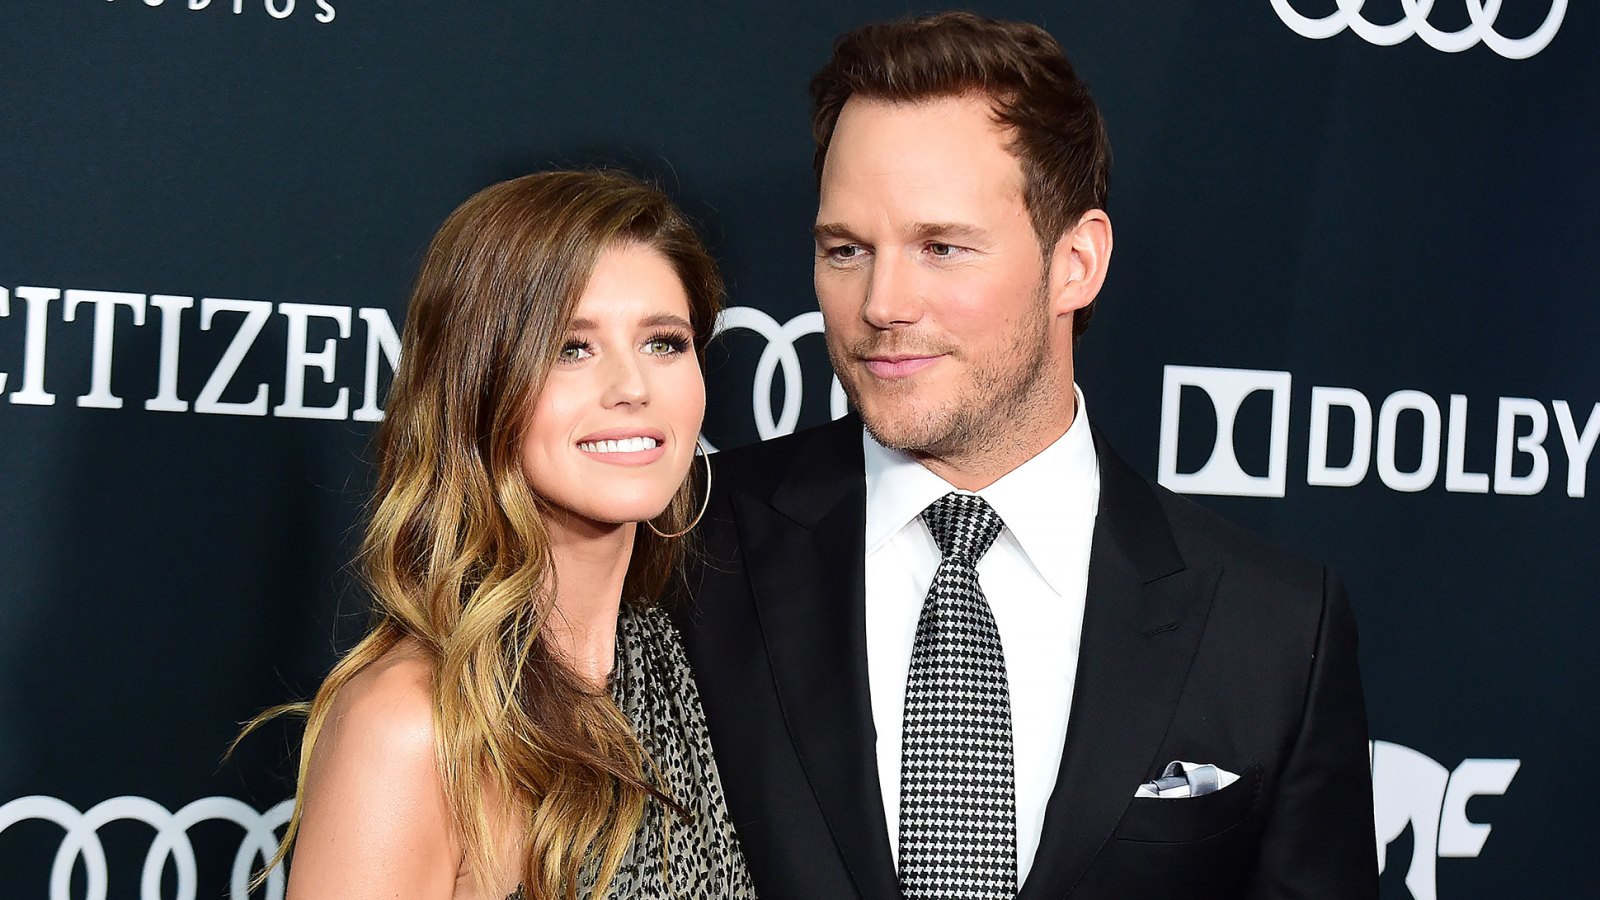 Katherine Schwarzenegger Reveals How She Maintains a ‘Strong’ Marriage With Chris Pratt